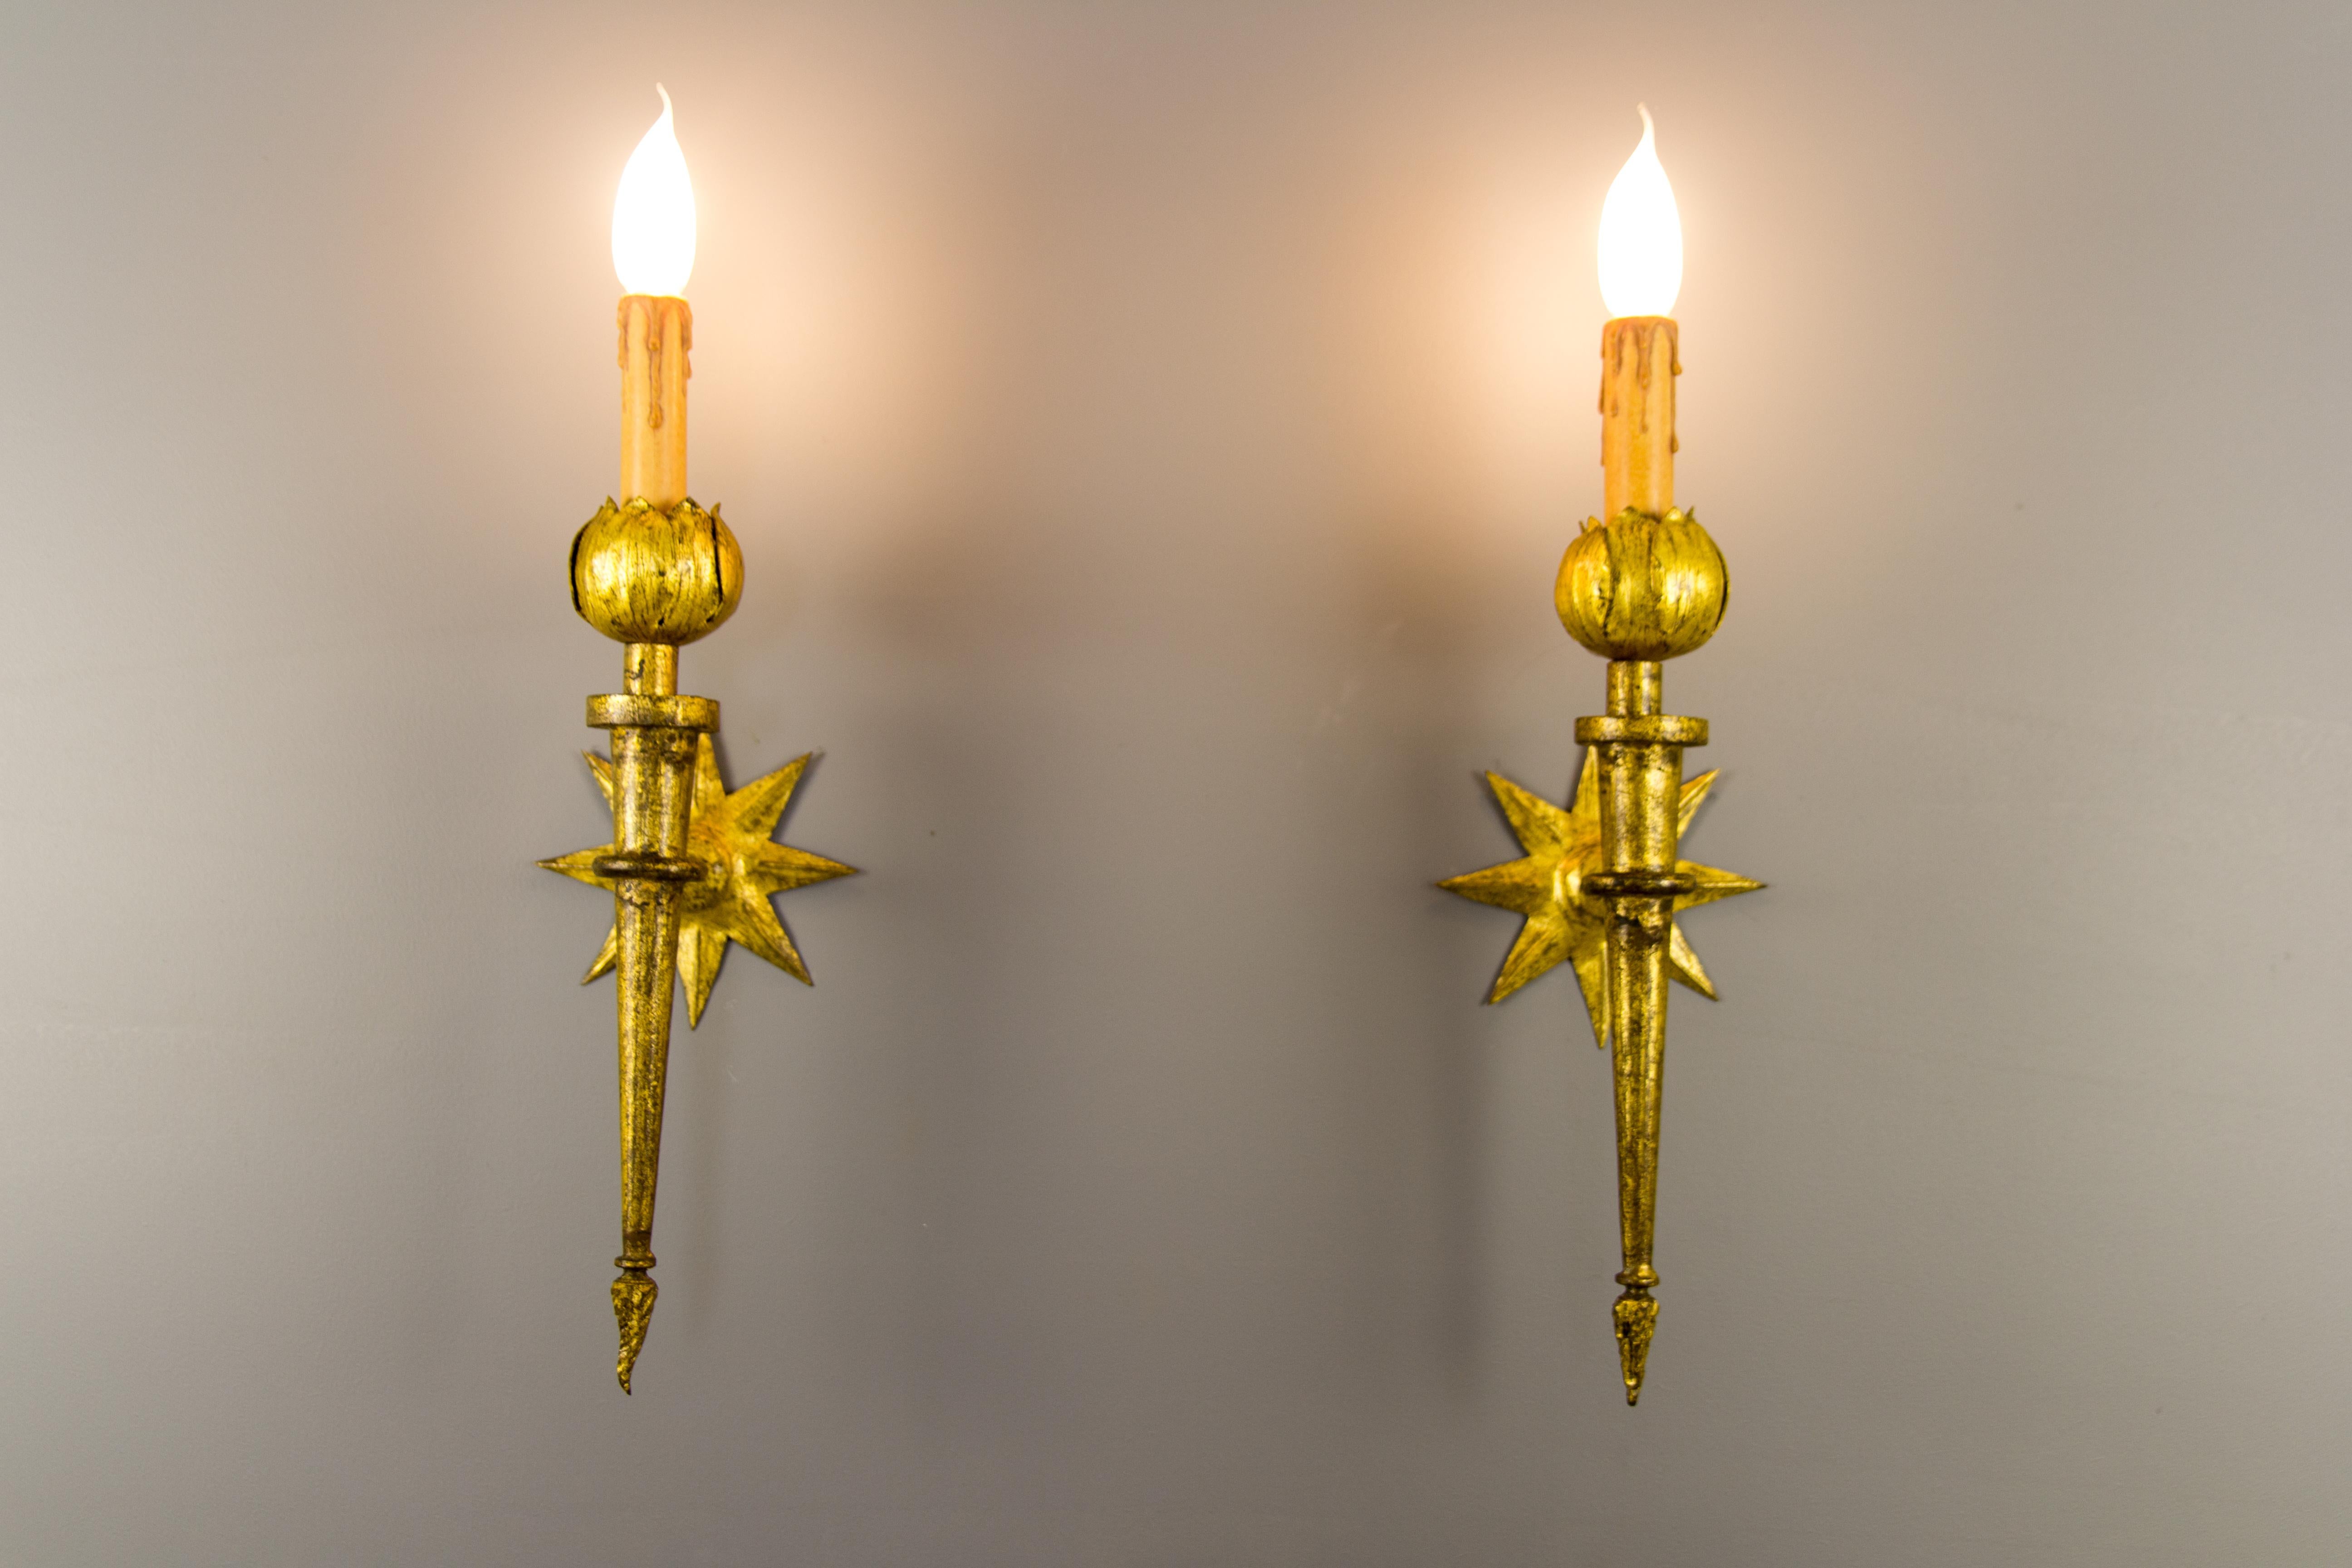 Superb pair of gold patinated wrought iron wall sconces after Gilbert Poillerat. Sockets are surmounted with petals and adorned at the base with stylized flames. These beautiful sconces have star-shaped wall mount. Each sconce is newly rewired and